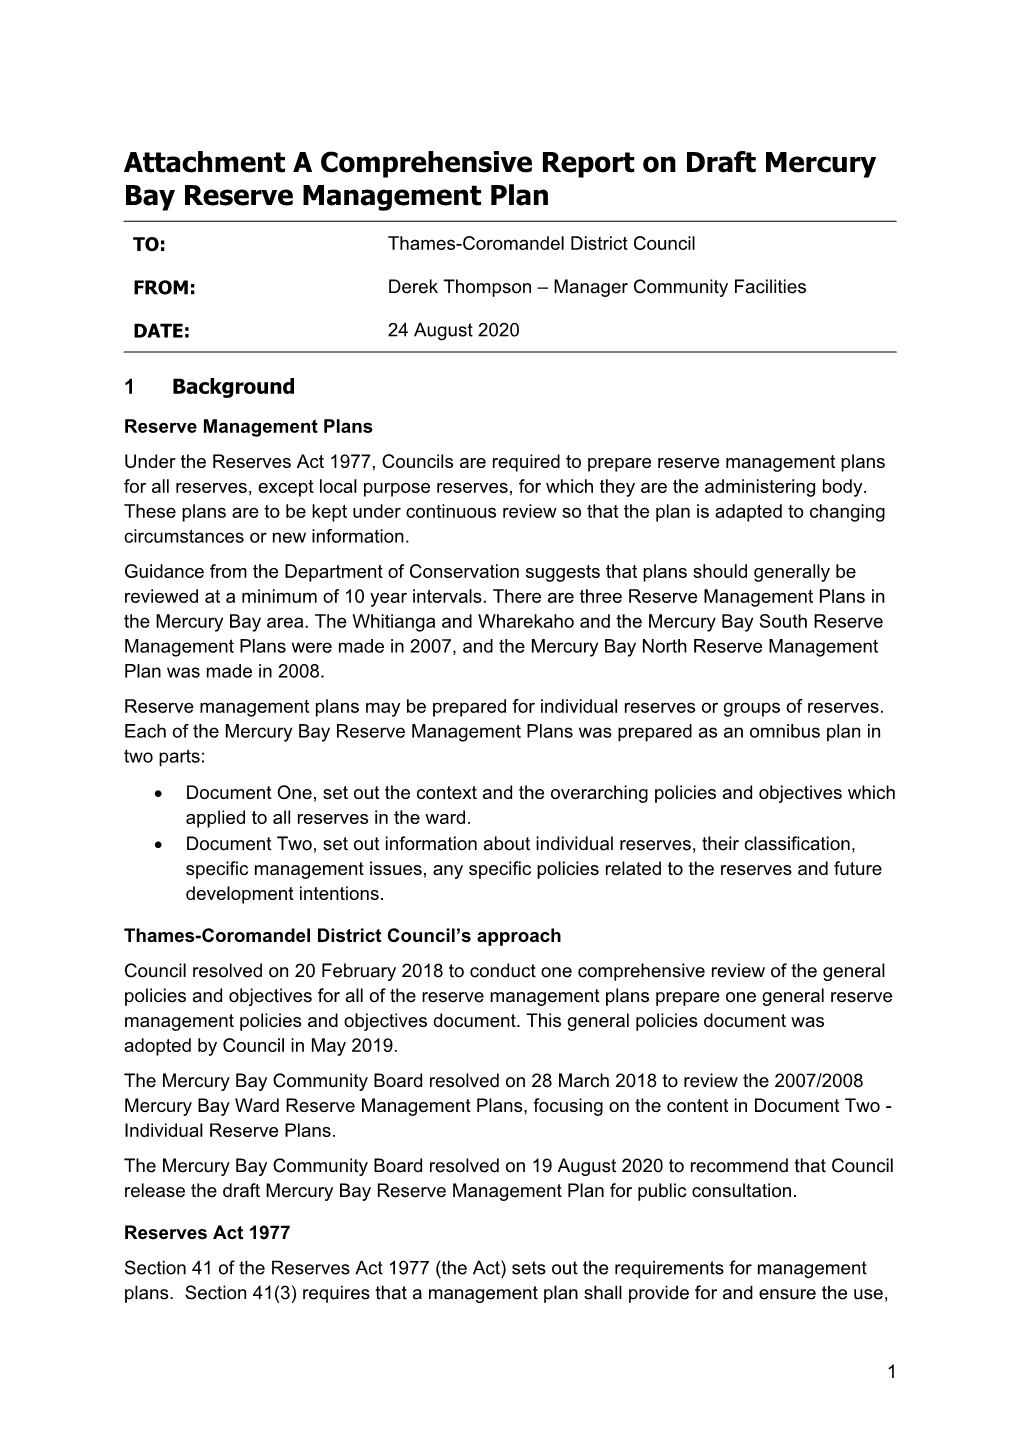 Attachment a Comprehensive Report on Draft Mercury Bay Reserve Management Plan